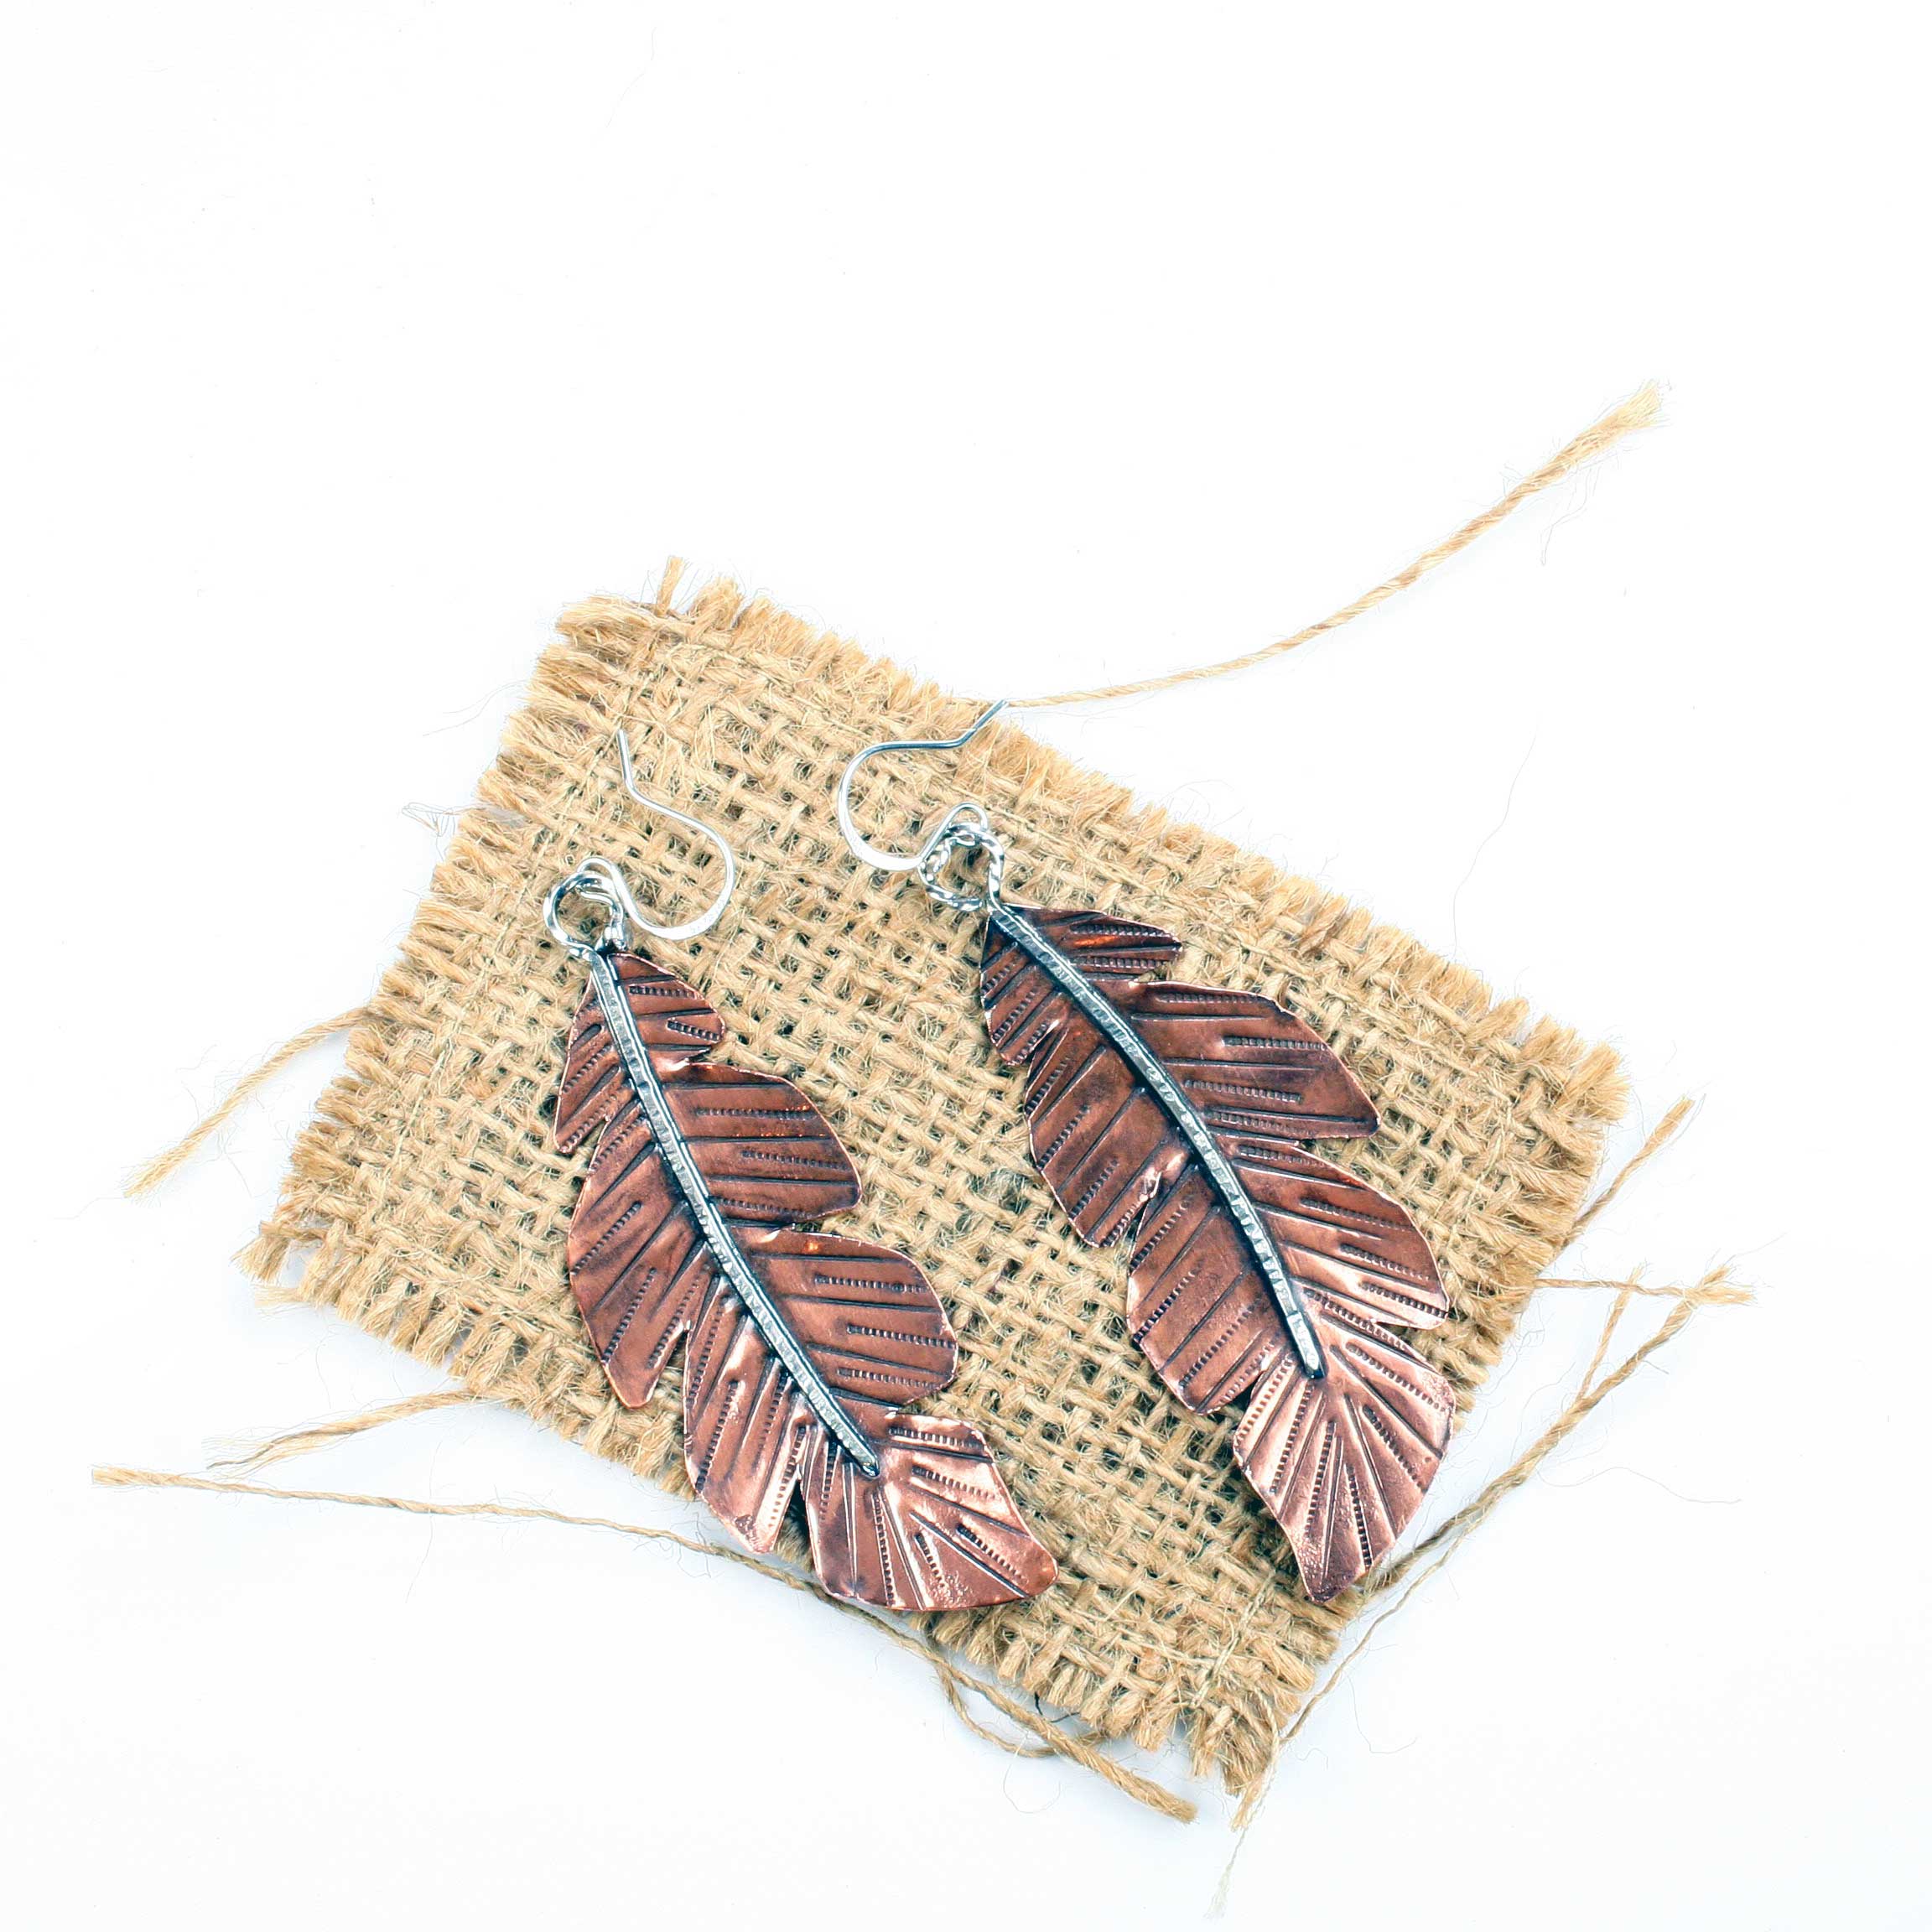 Stamped Copper Feather Earrings with Sterling Silver